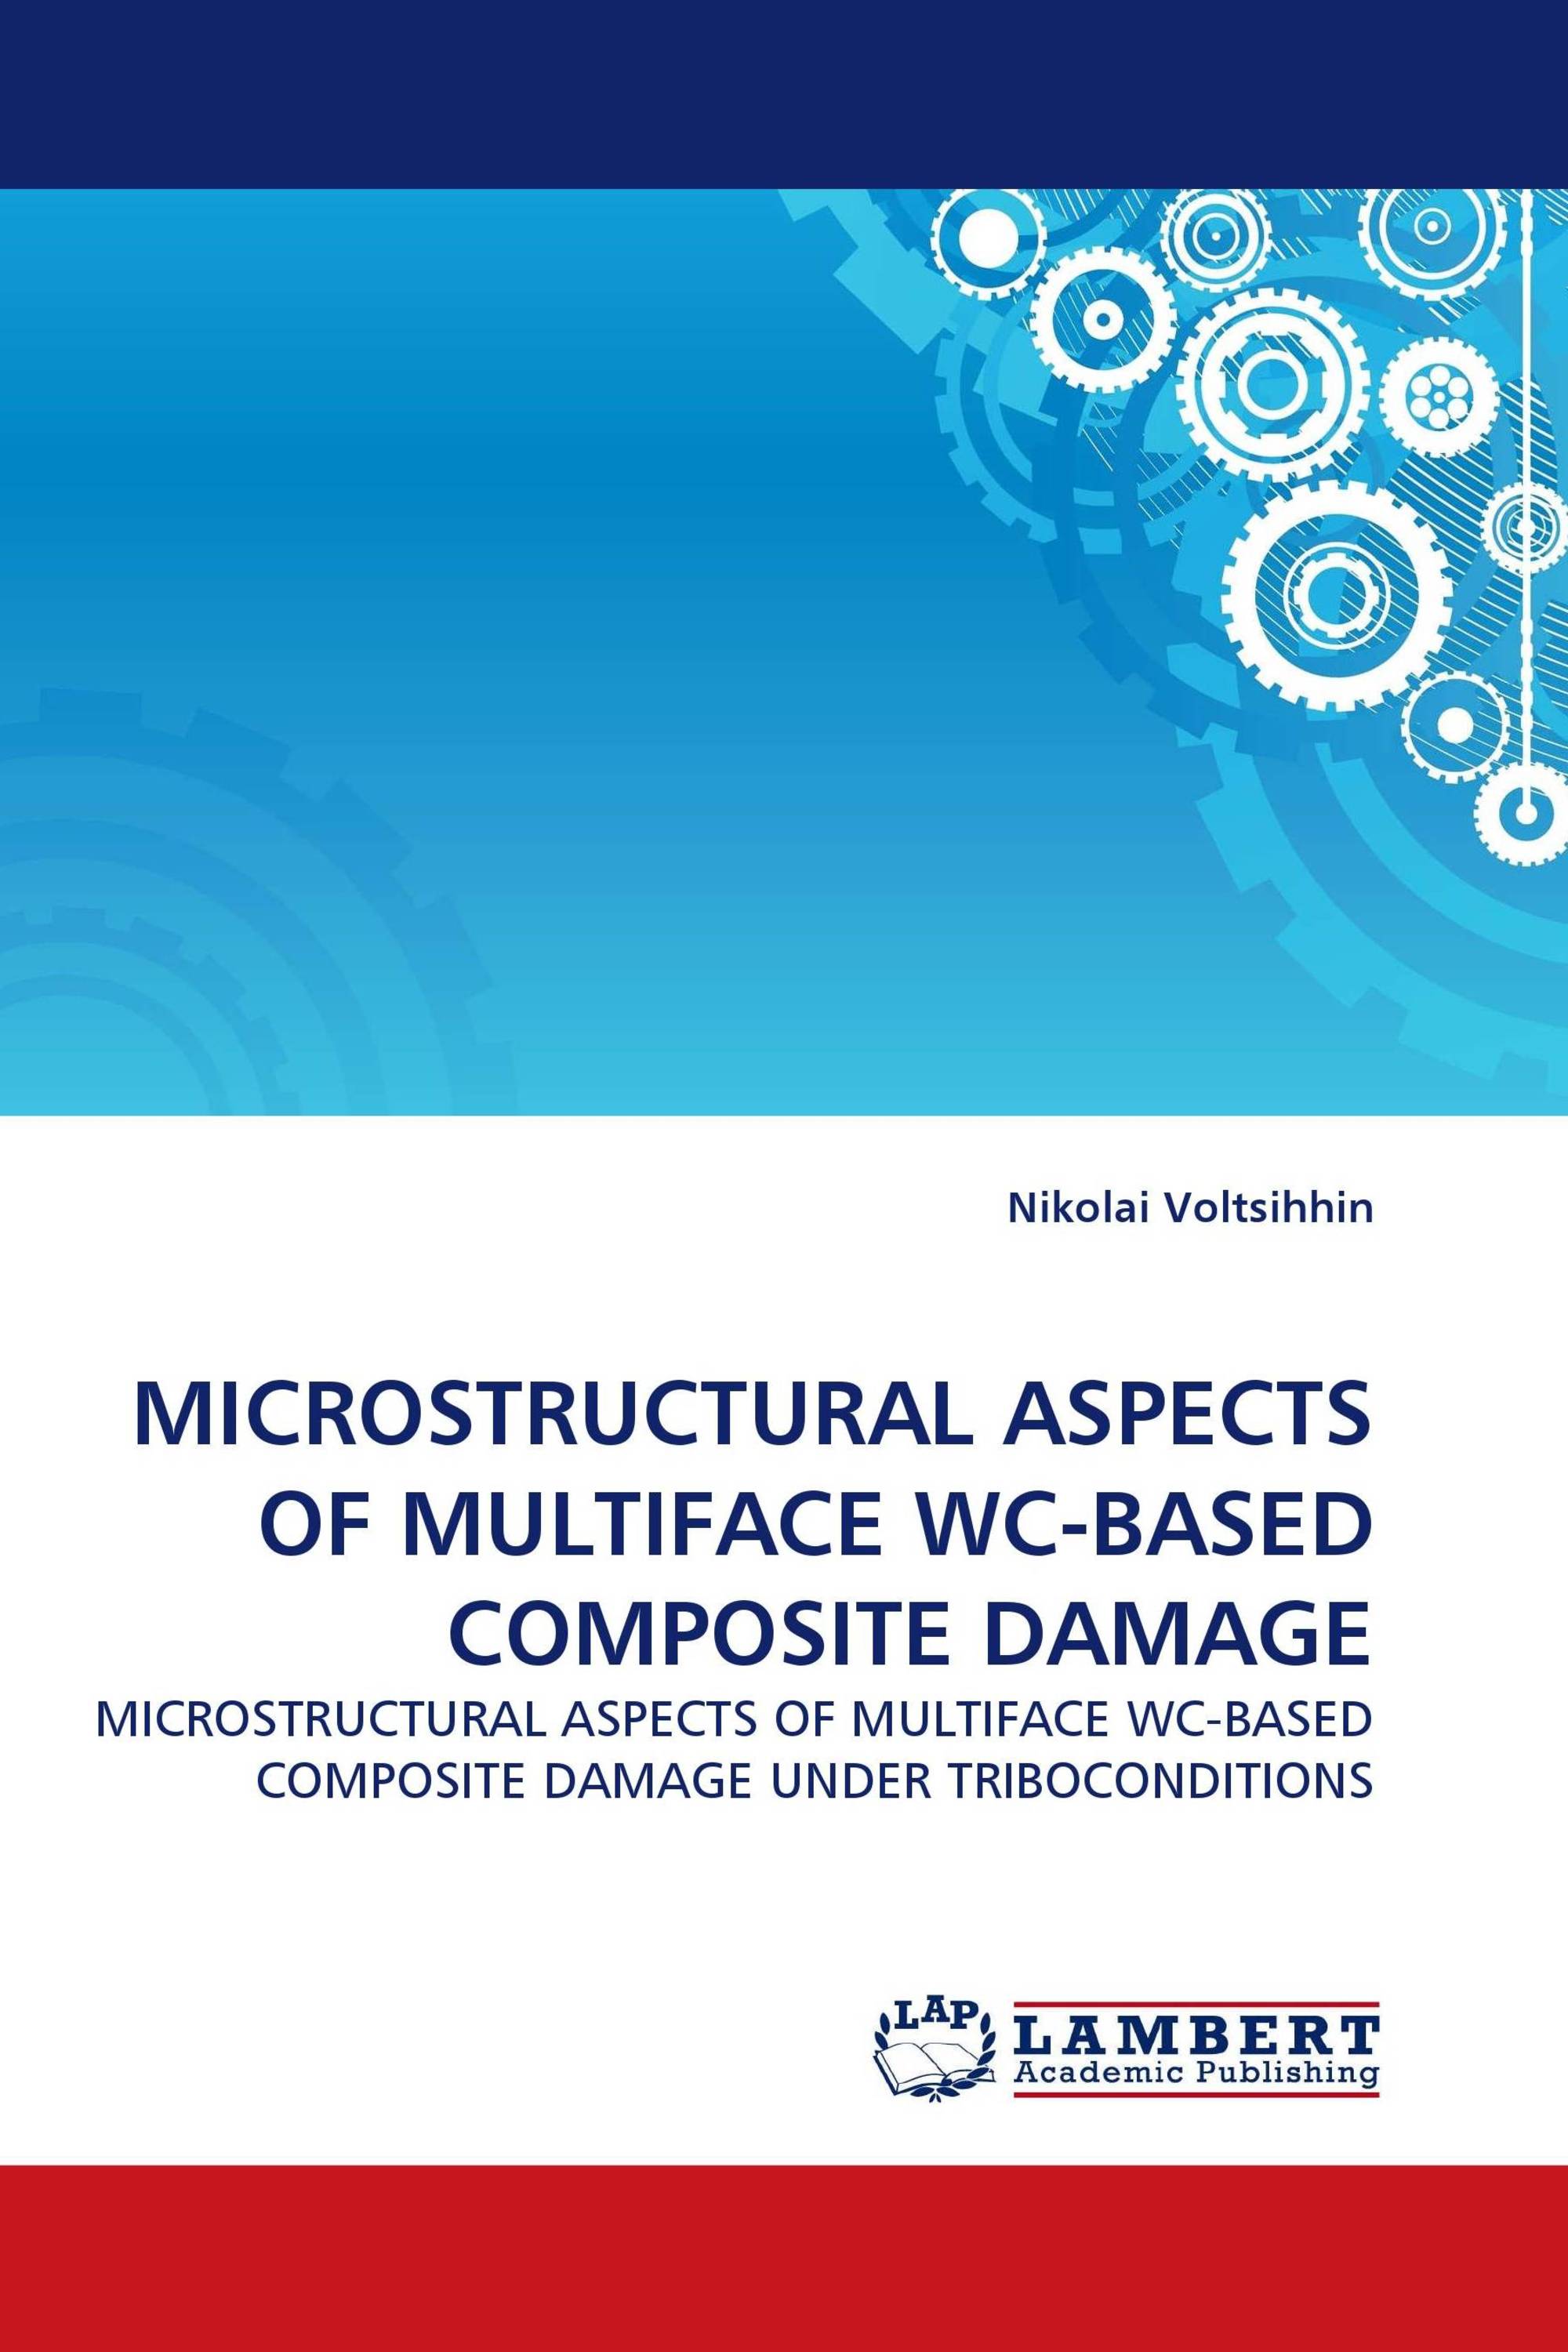 MICROSTRUCTURAL ASPECTS OF MULTIFACE WC-BASED COMPOSITE DAMAGE